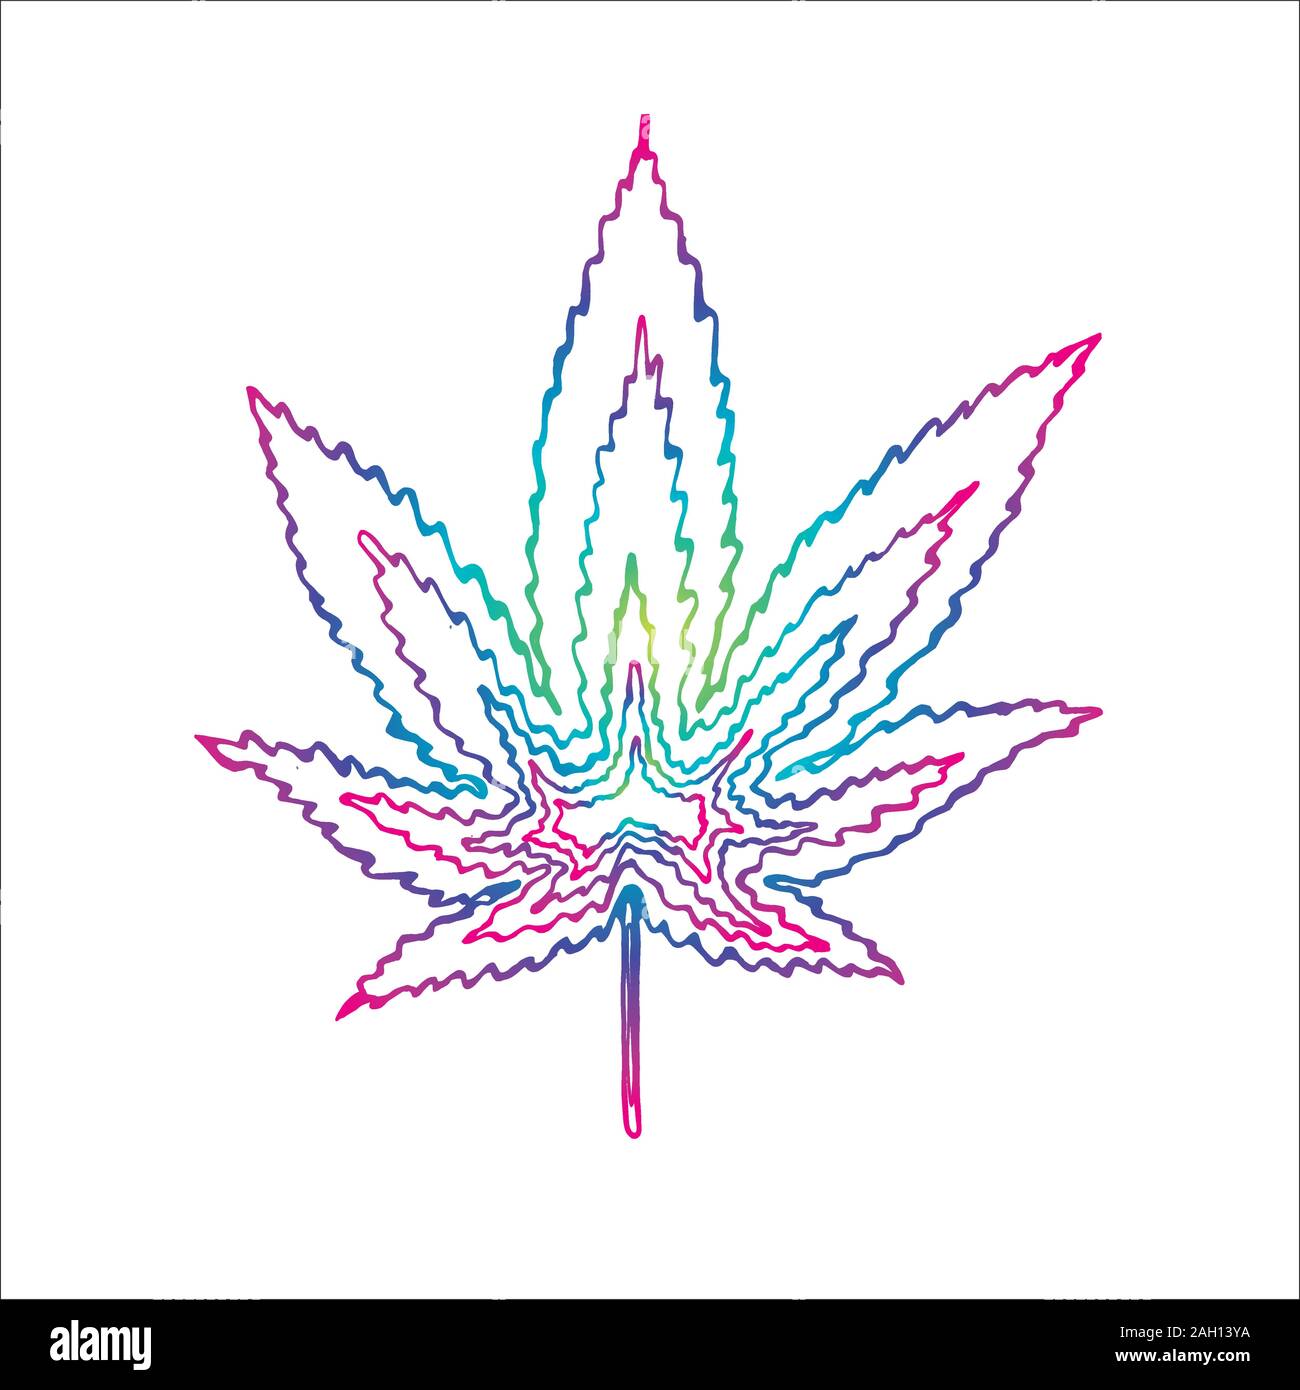 weed leaf tattoo by throwedOFFgraphics on DeviantArt